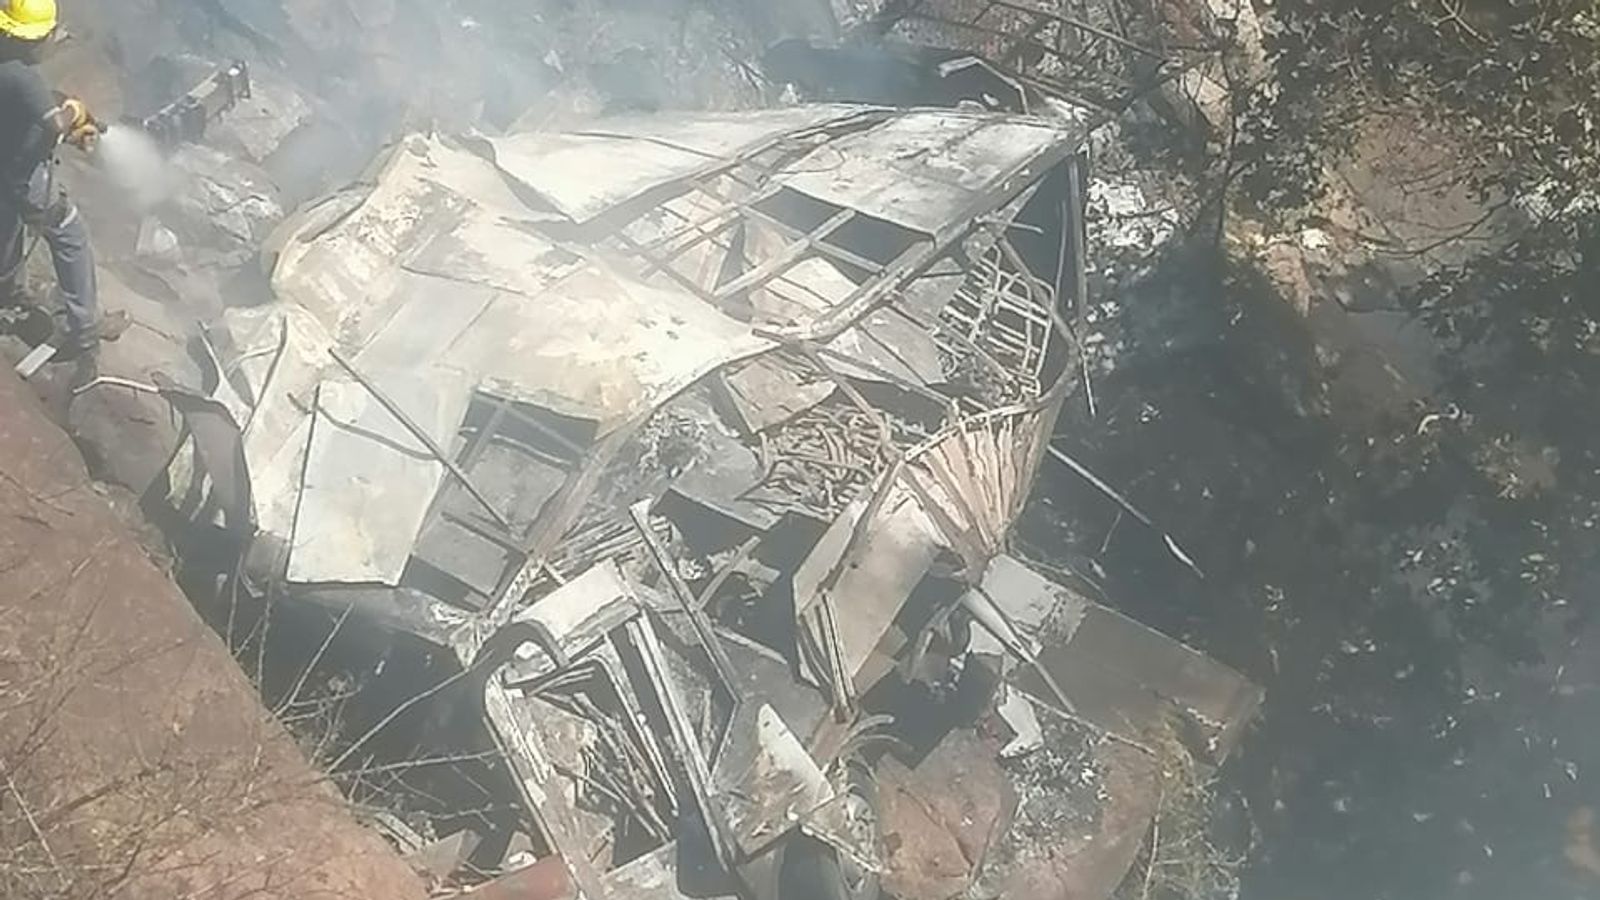 Bus Crash in South Africa Kills Over 40 People